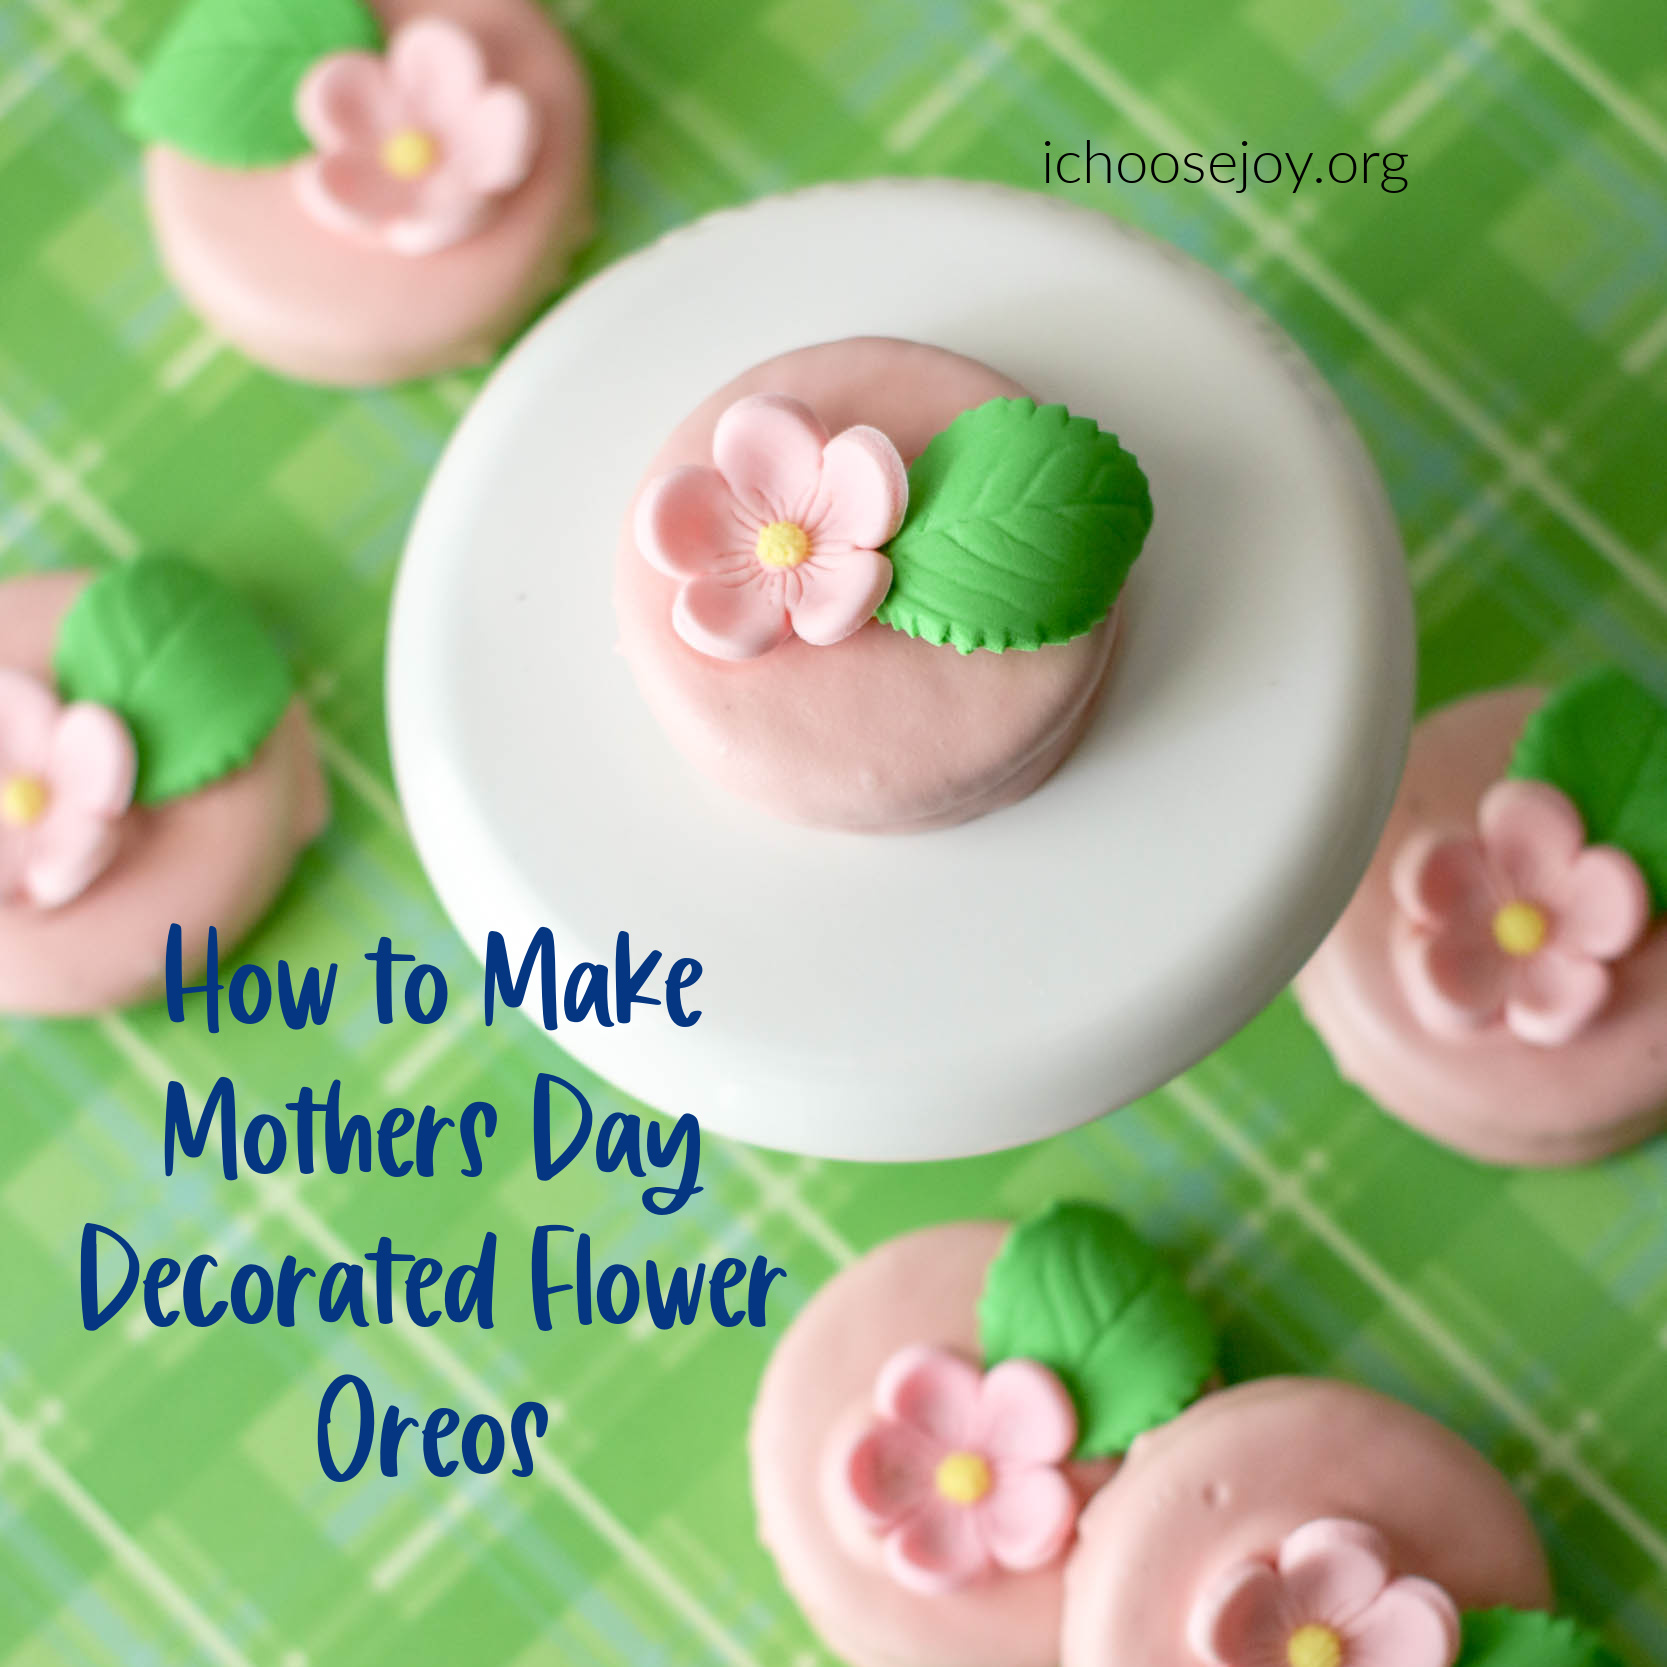 How to Make Mother’s Day Decorated Flower Oreos